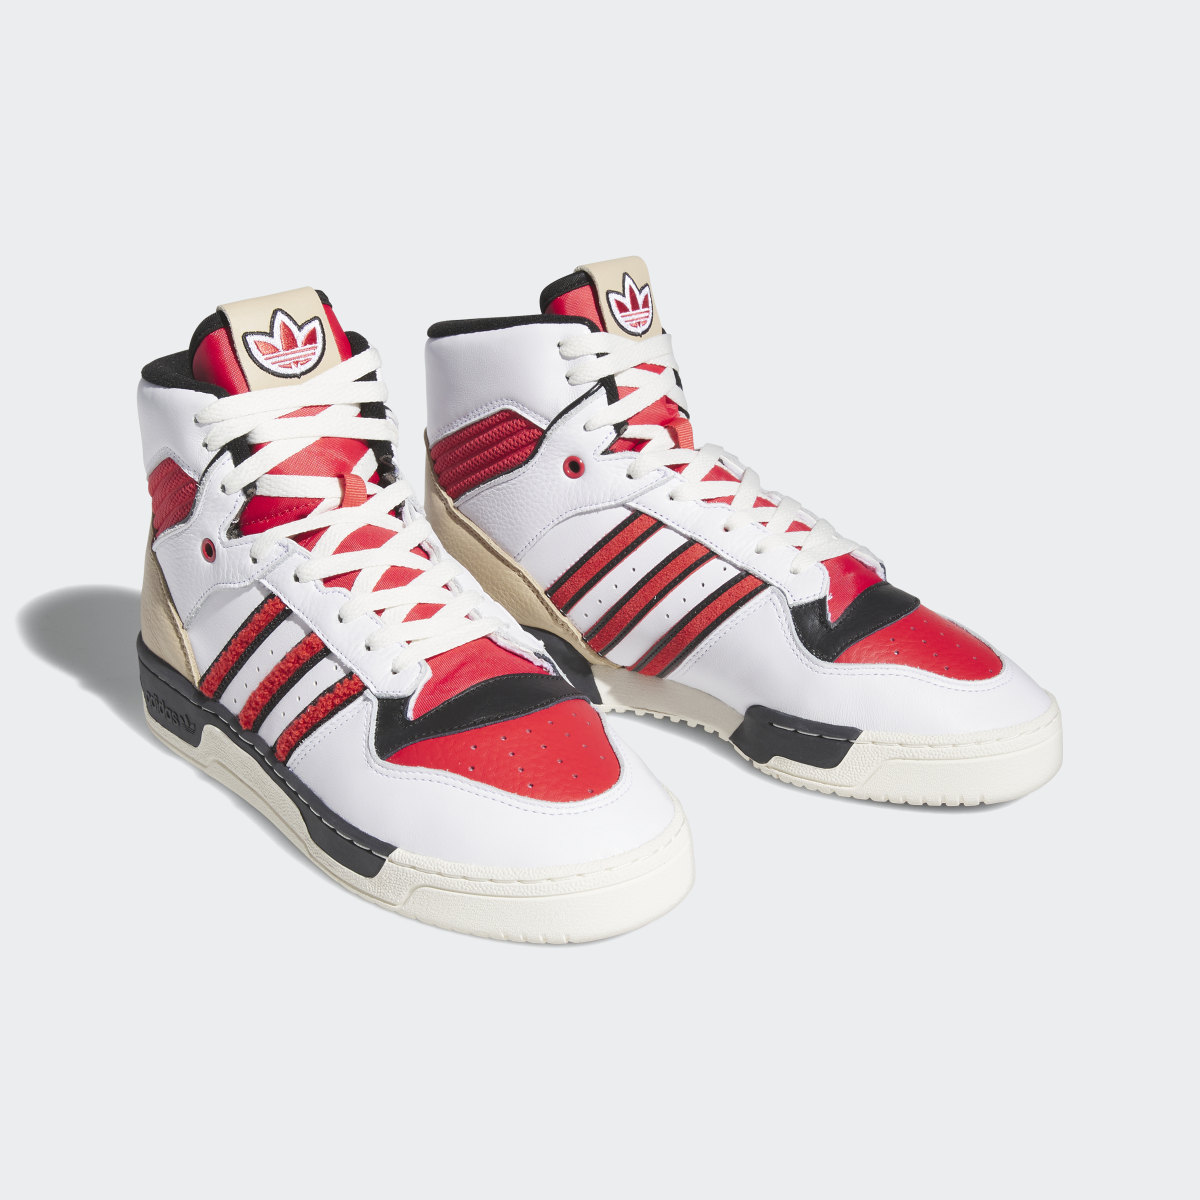 Adidas Rivalry High Shoes. 5